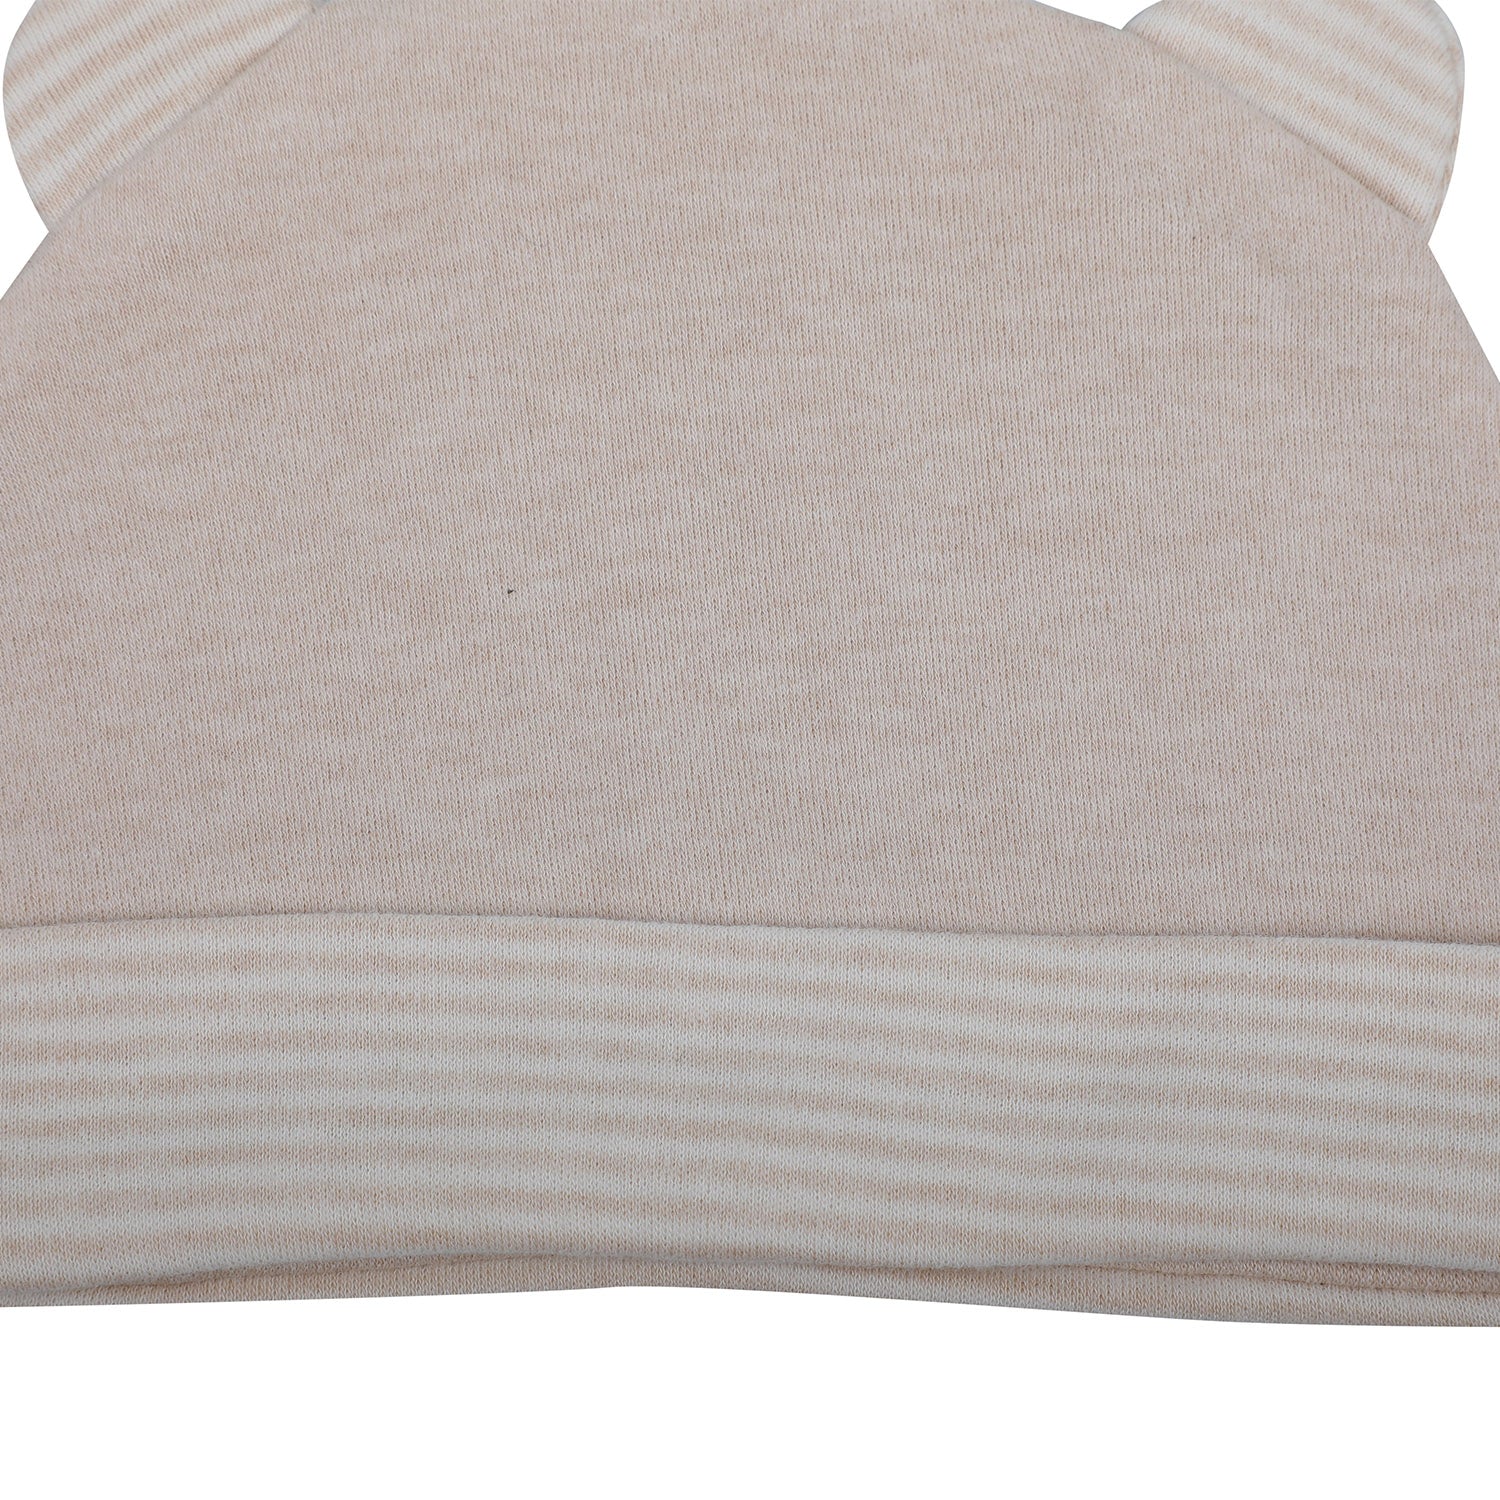 Baby Moo Solid And Striped Organic Soft Cotton Pack of 2 Caps - Beige - Baby Moo